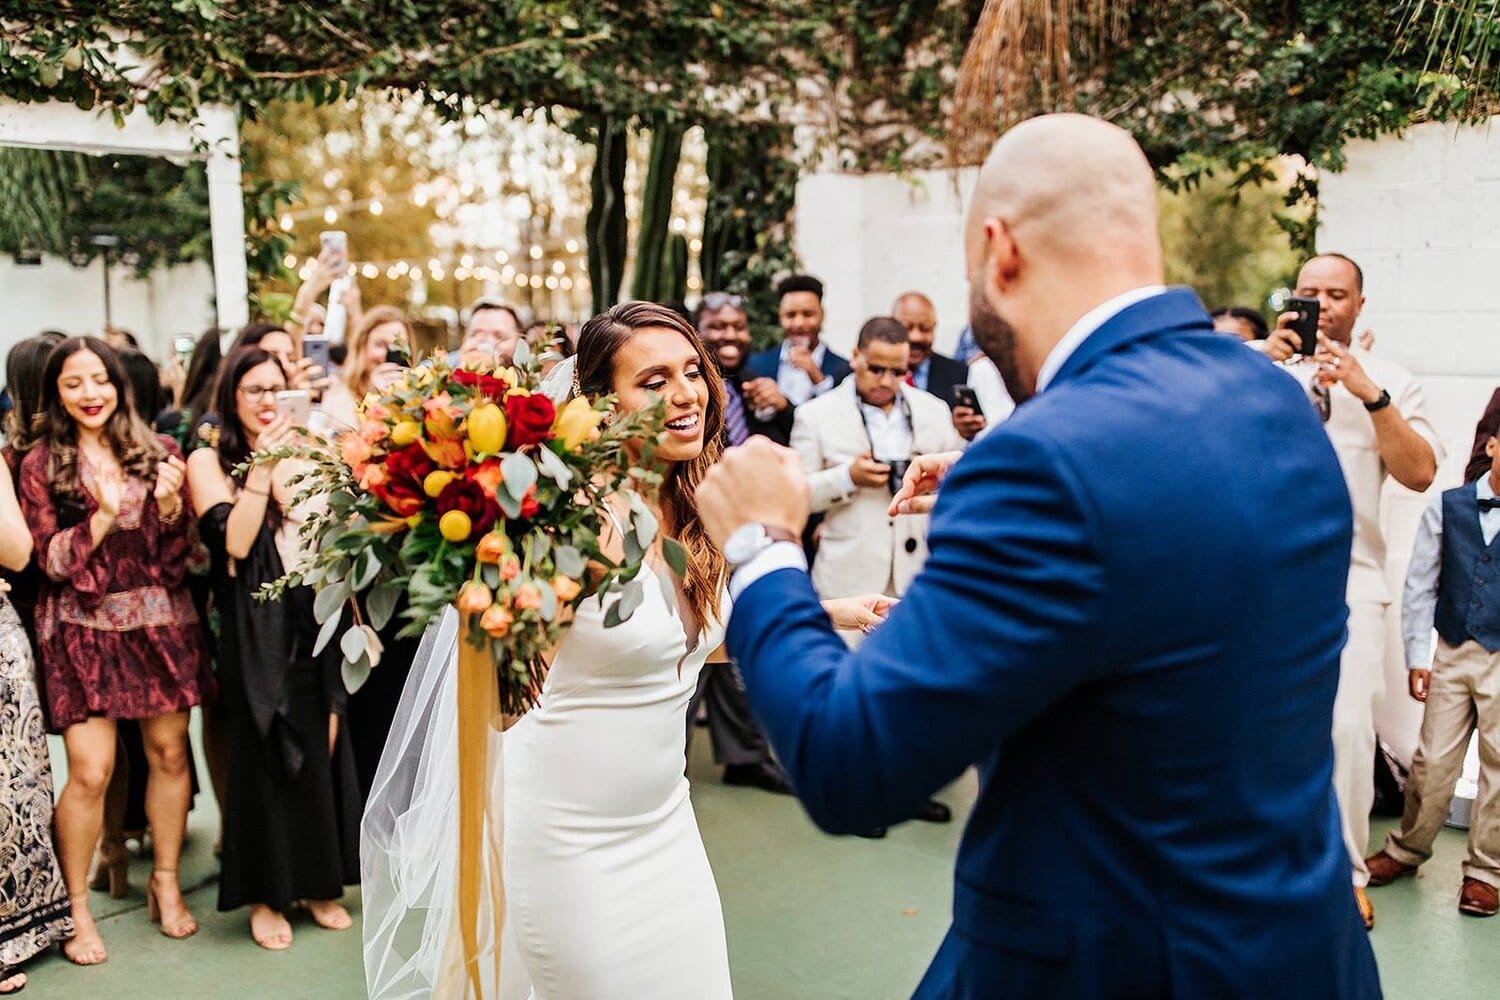 bride holding bright colored bouquet of flowers dancing next to groom with guests standing around them